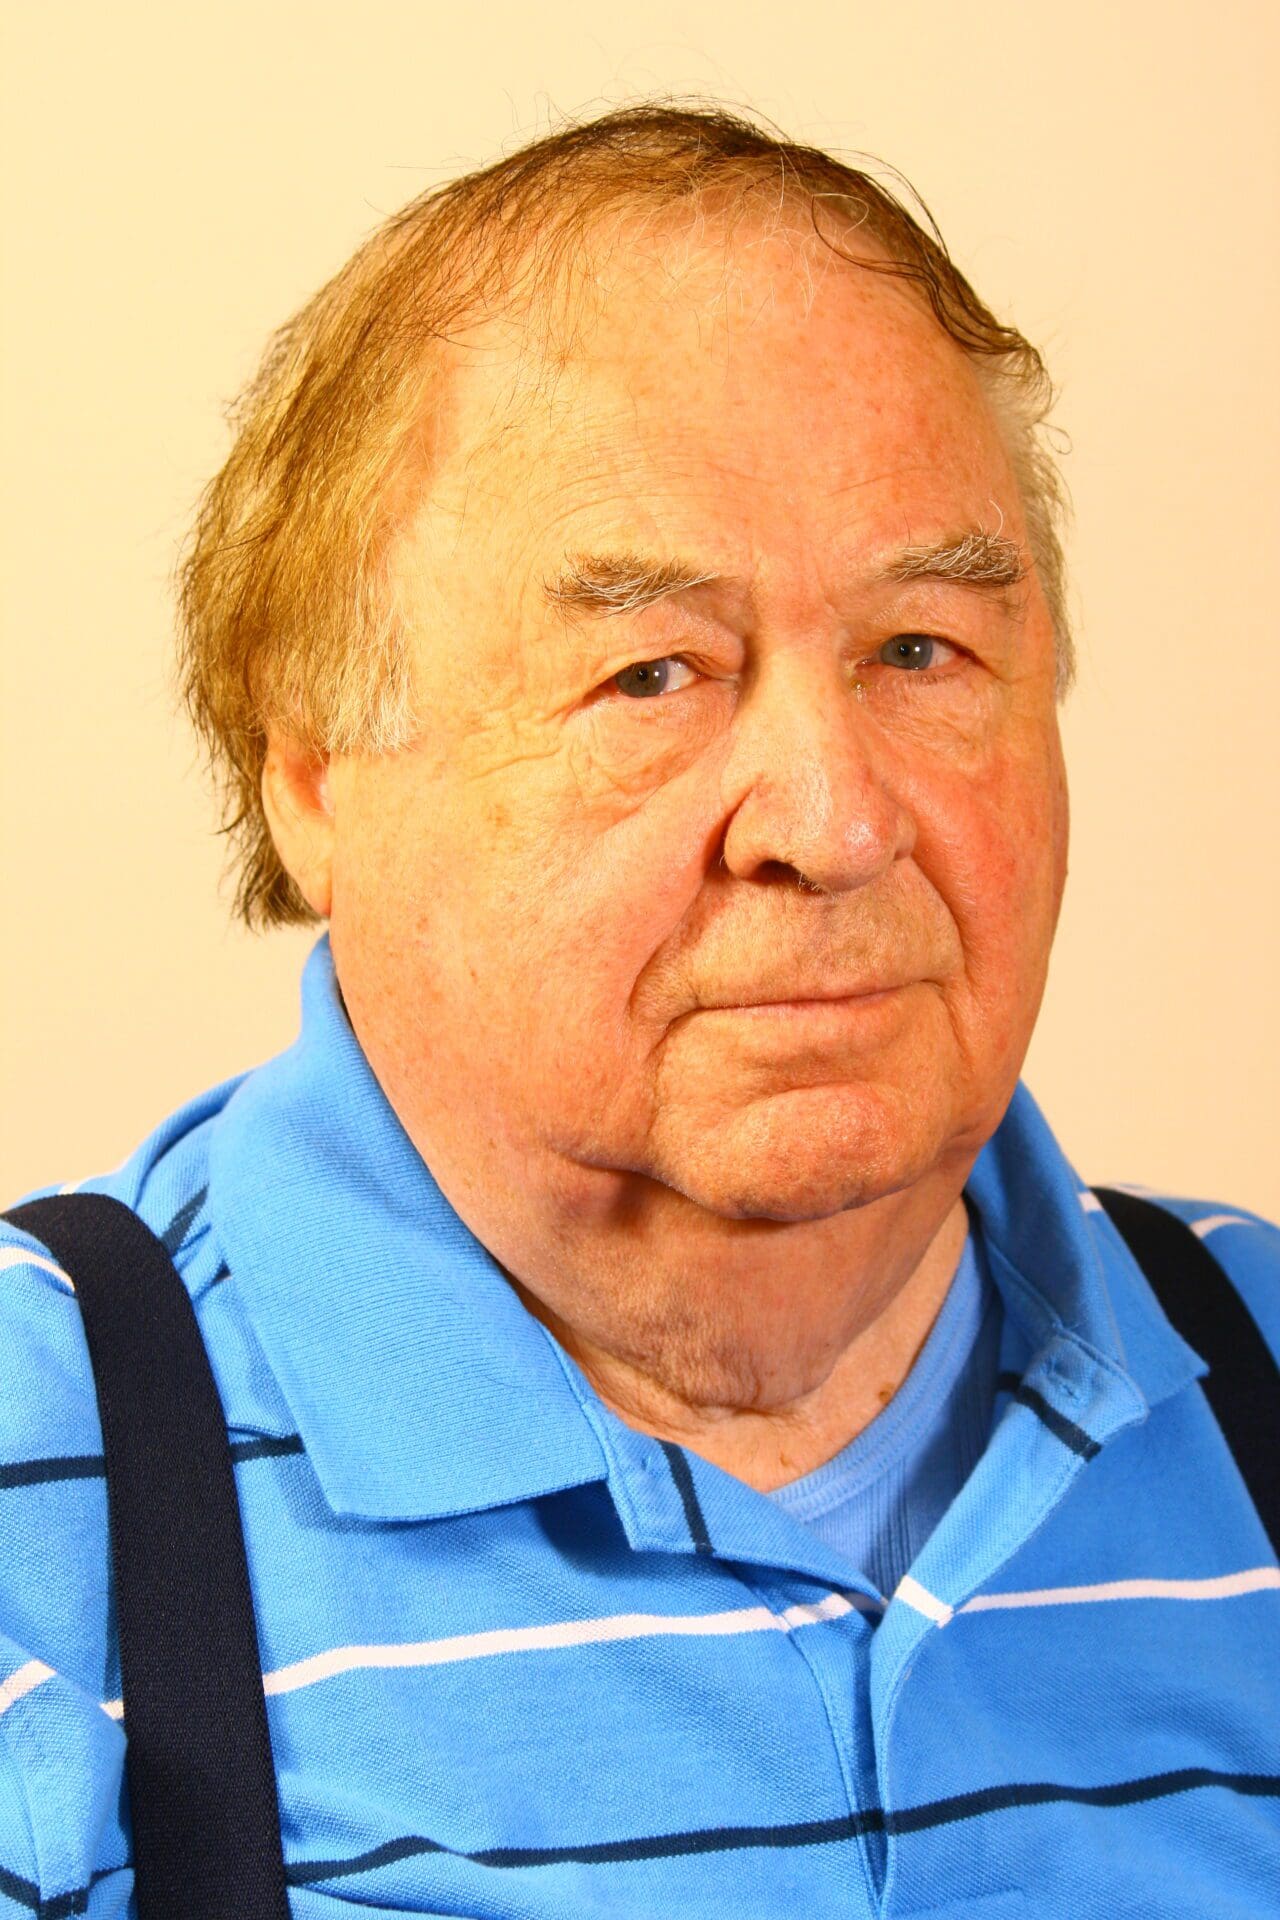 An older man wearing a blue shirt and suspenders.